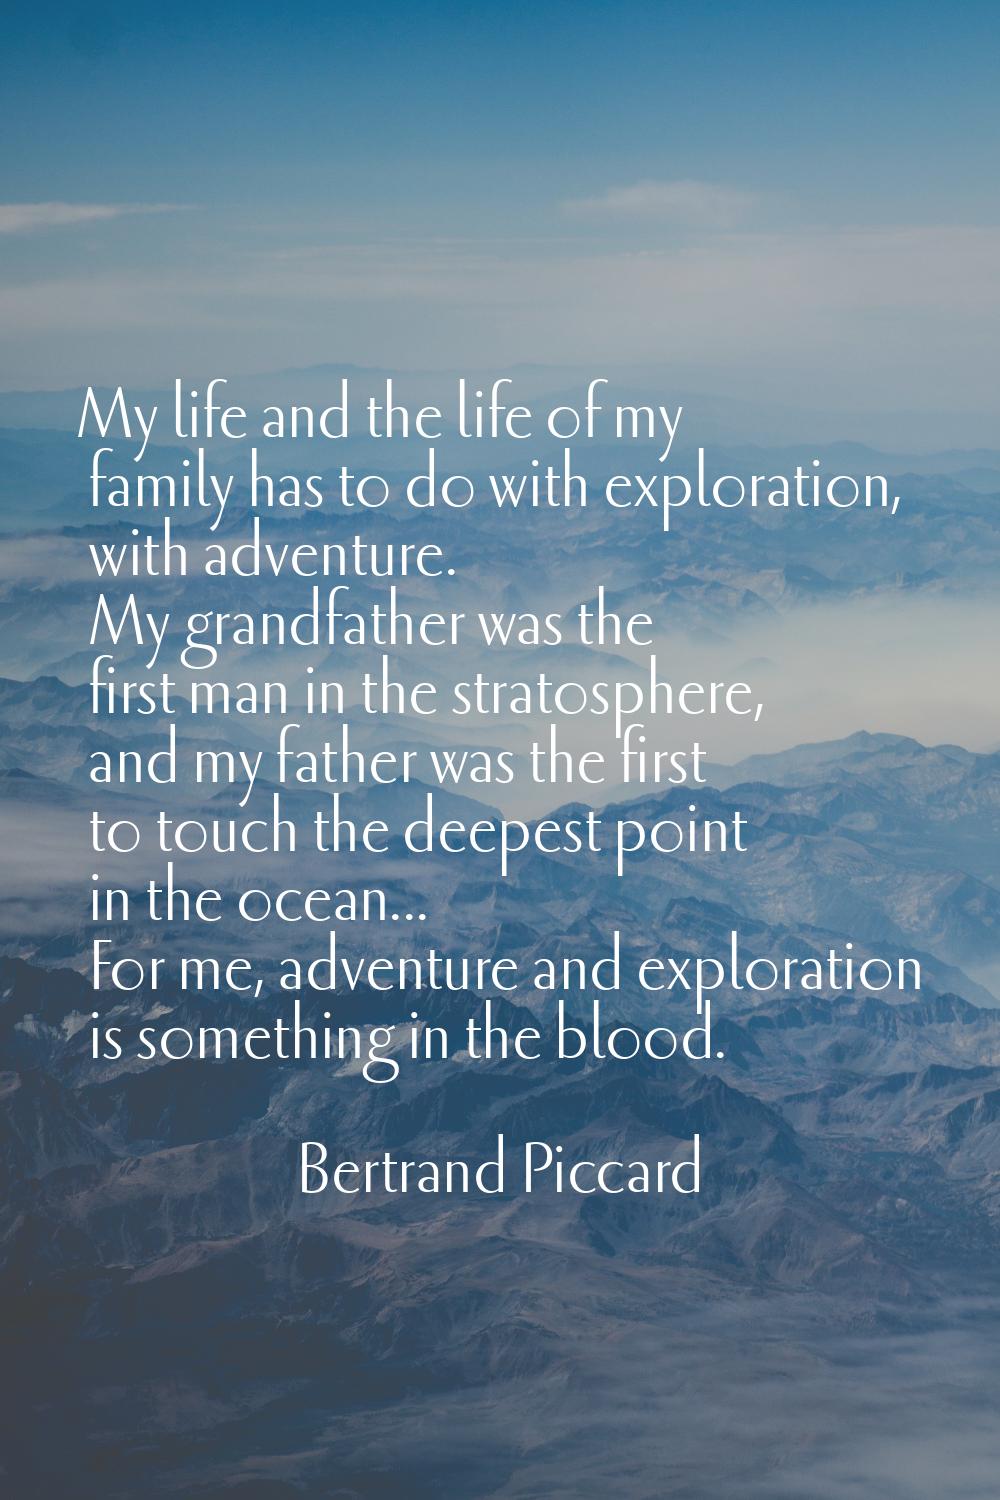 My life and the life of my family has to do with exploration, with adventure. My grandfather was th